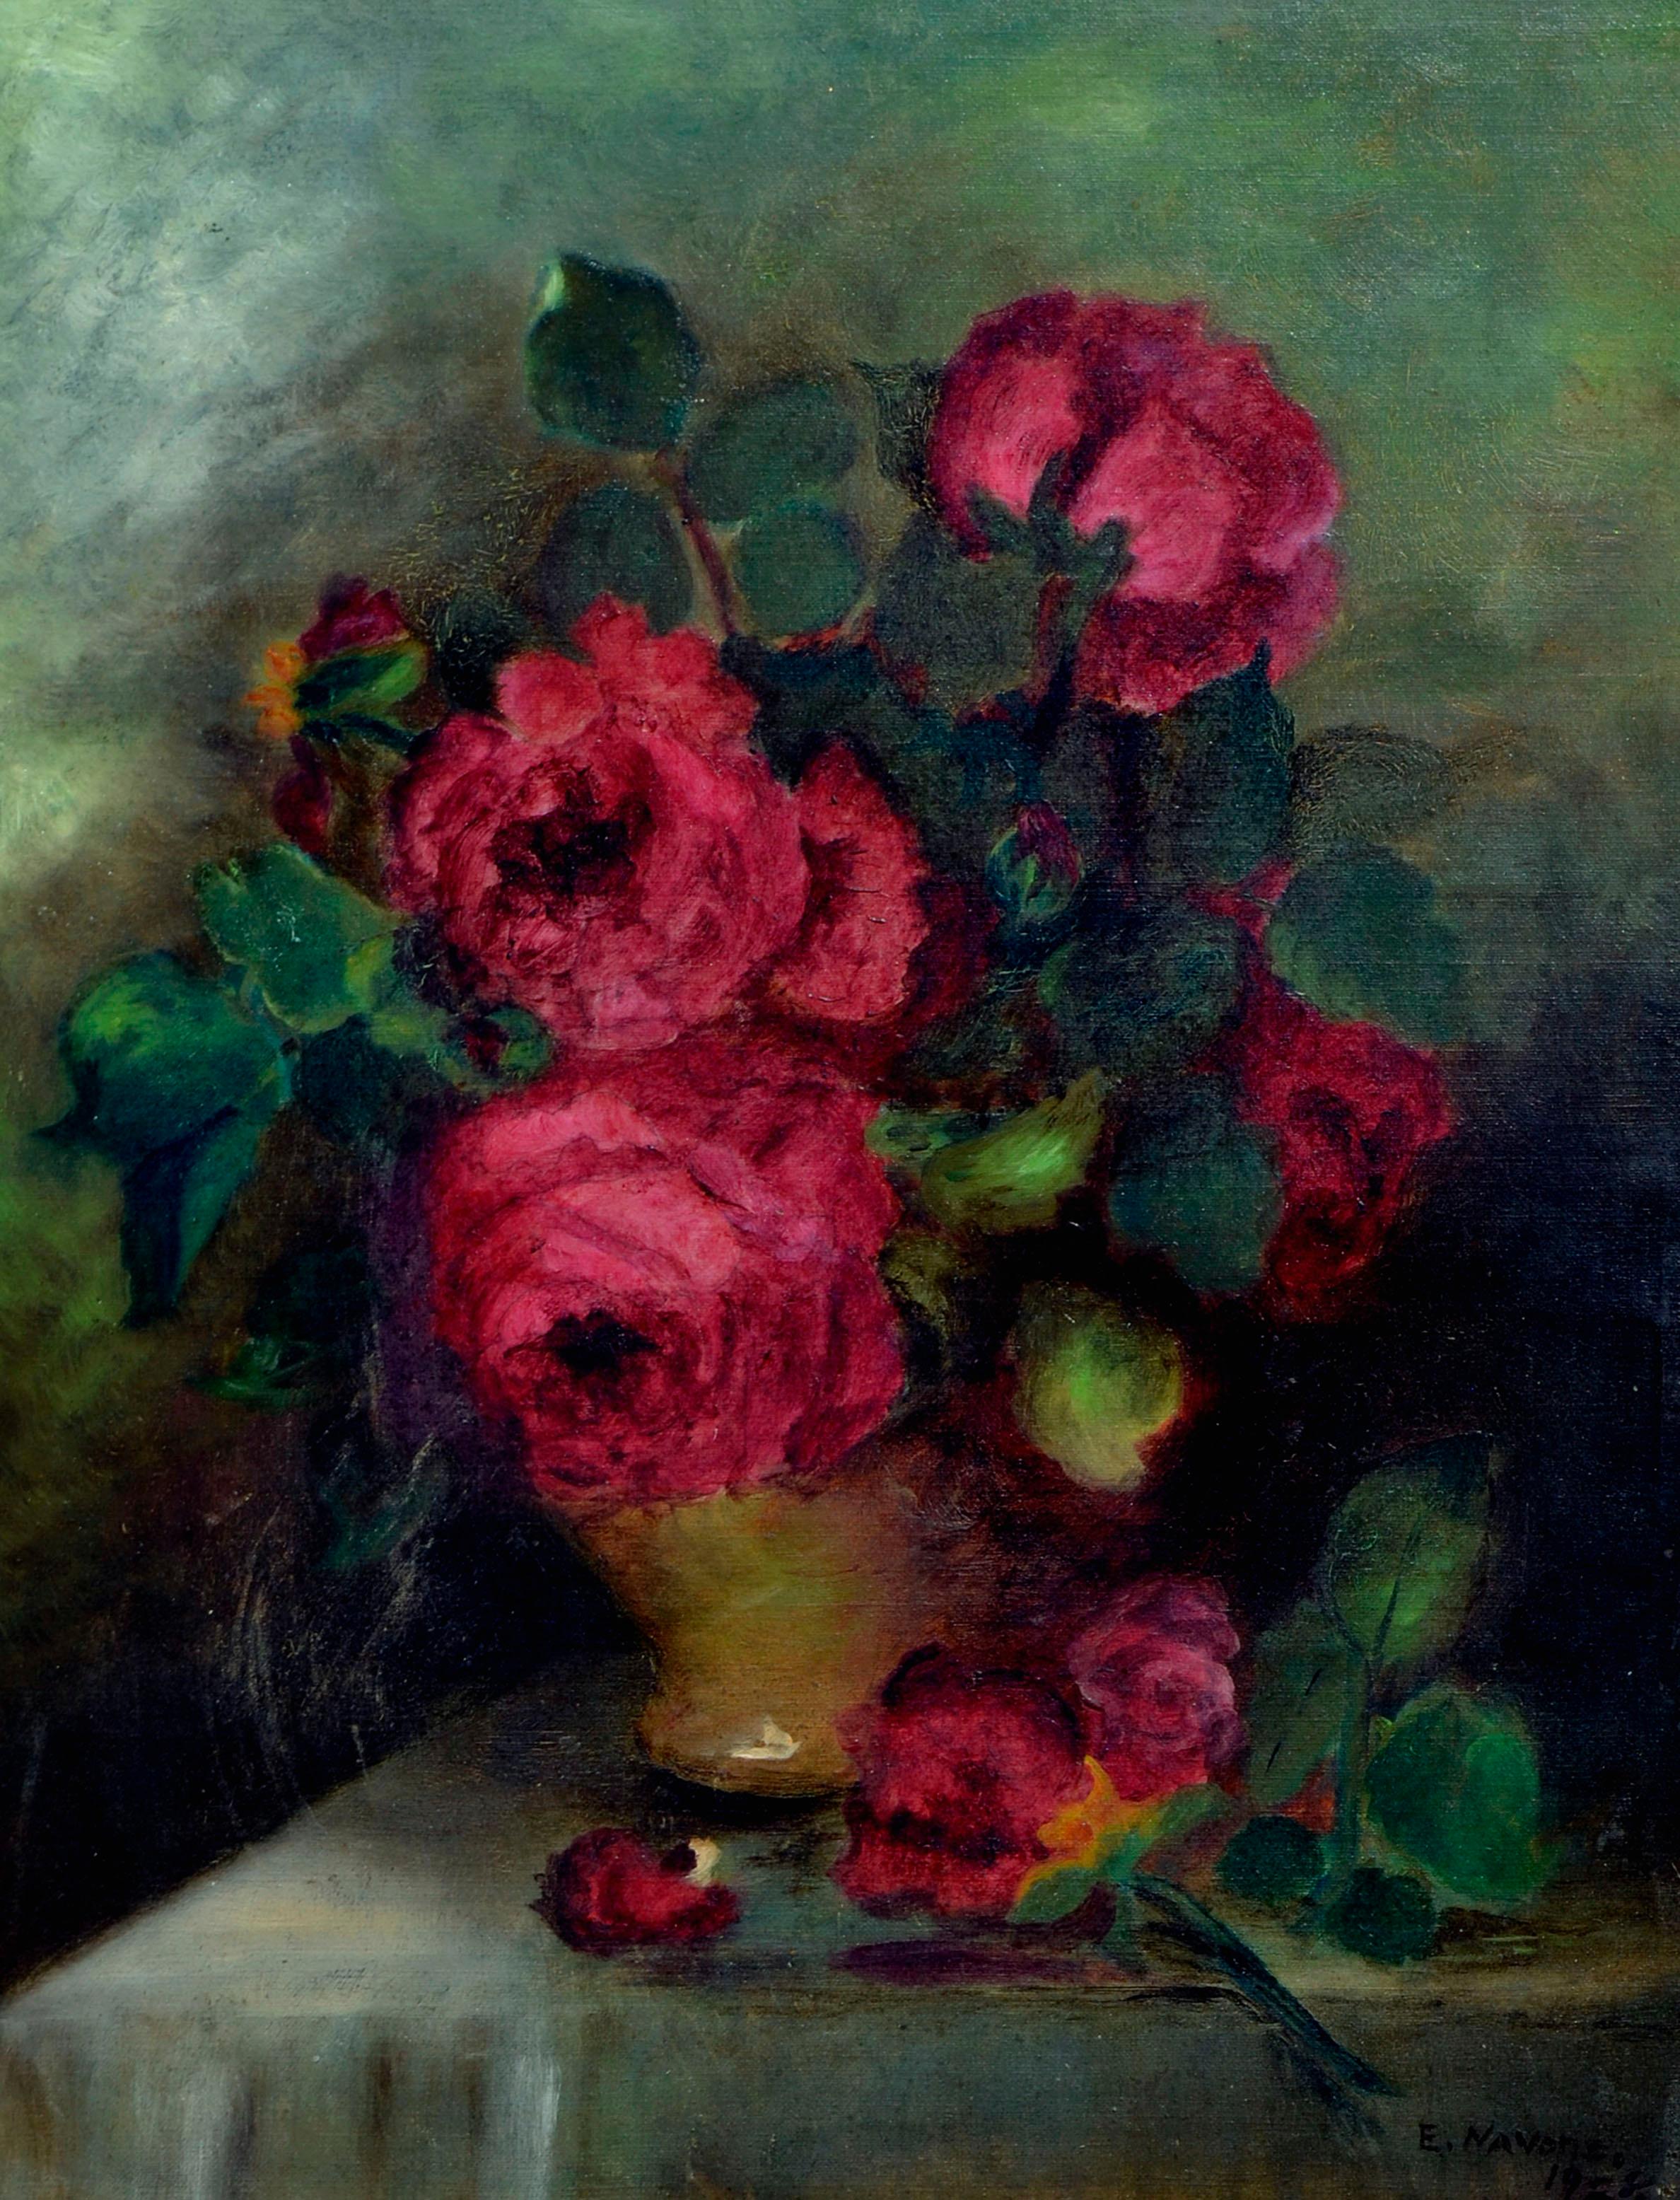 1920's Red Roses Still Life - Painting by Emma Navone Parnisari